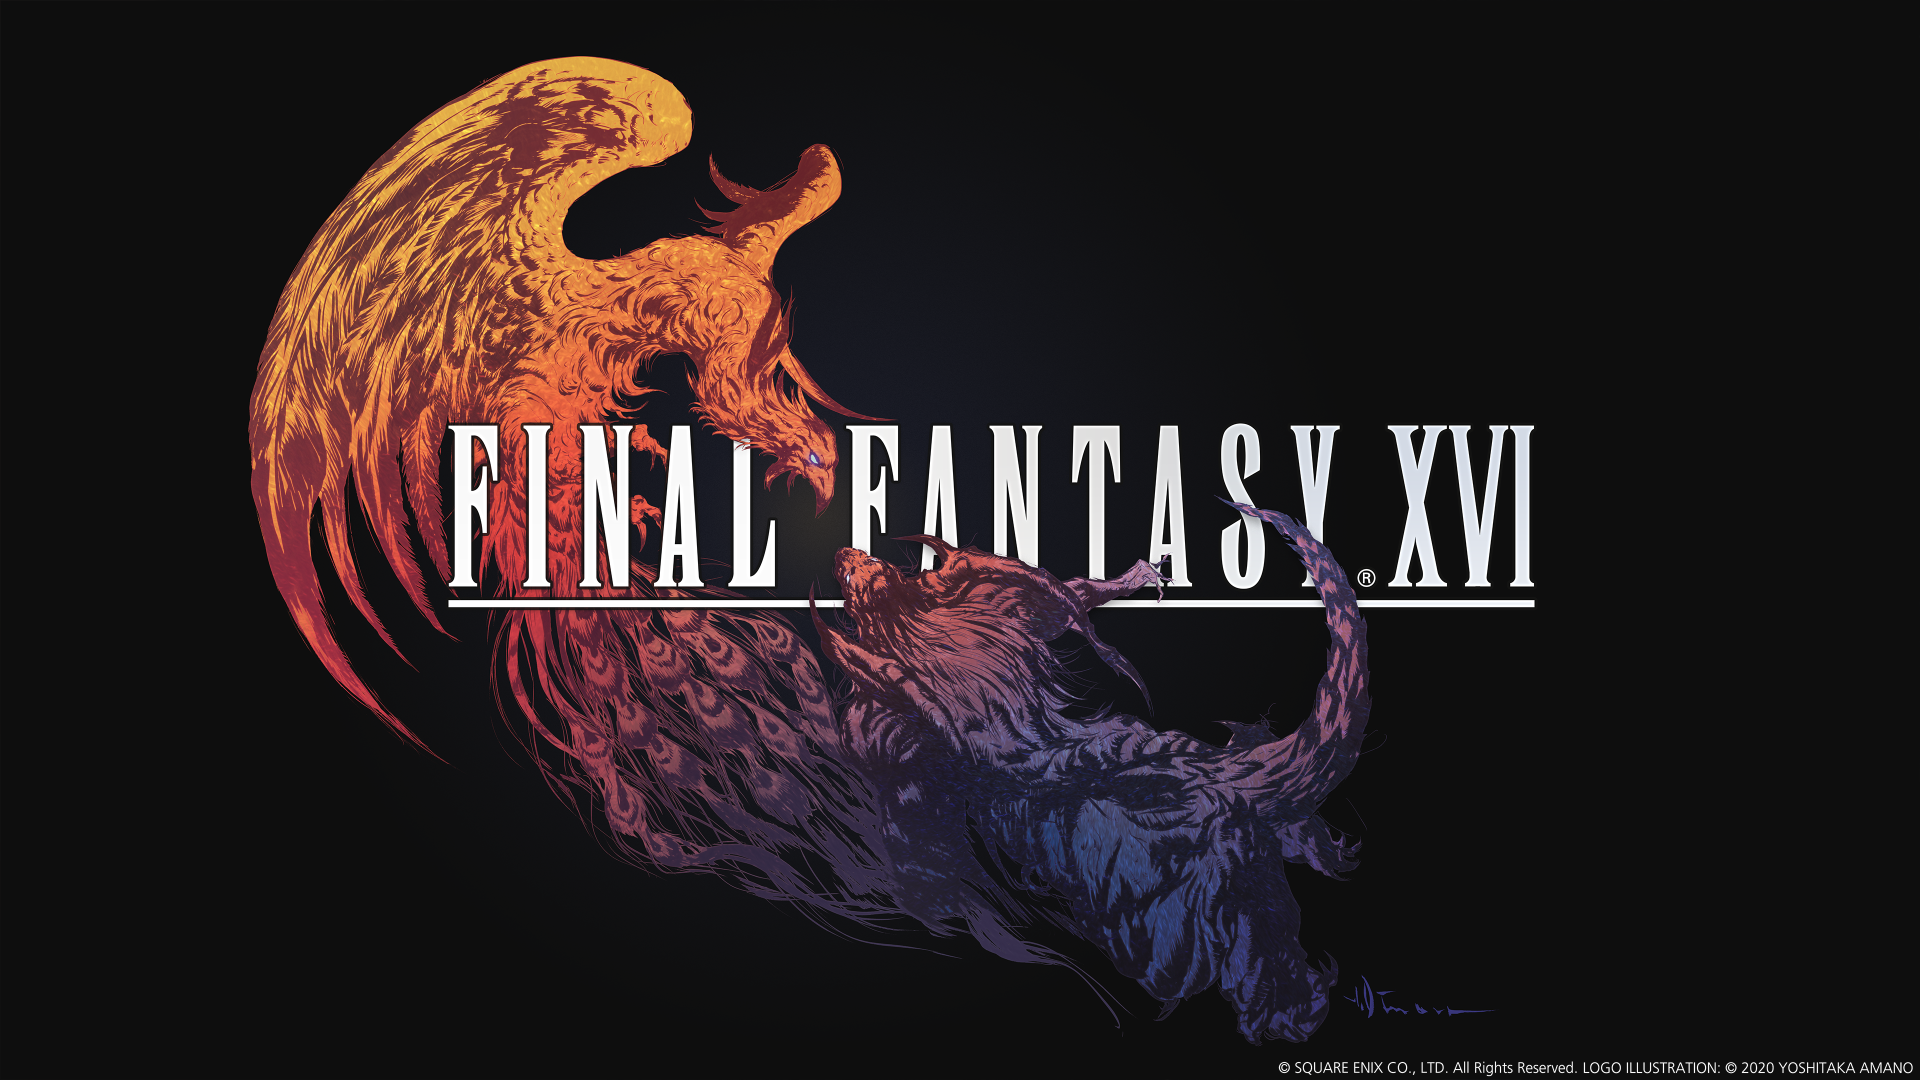 High Quality Wallpapers Of Final Fantasy XVI Game